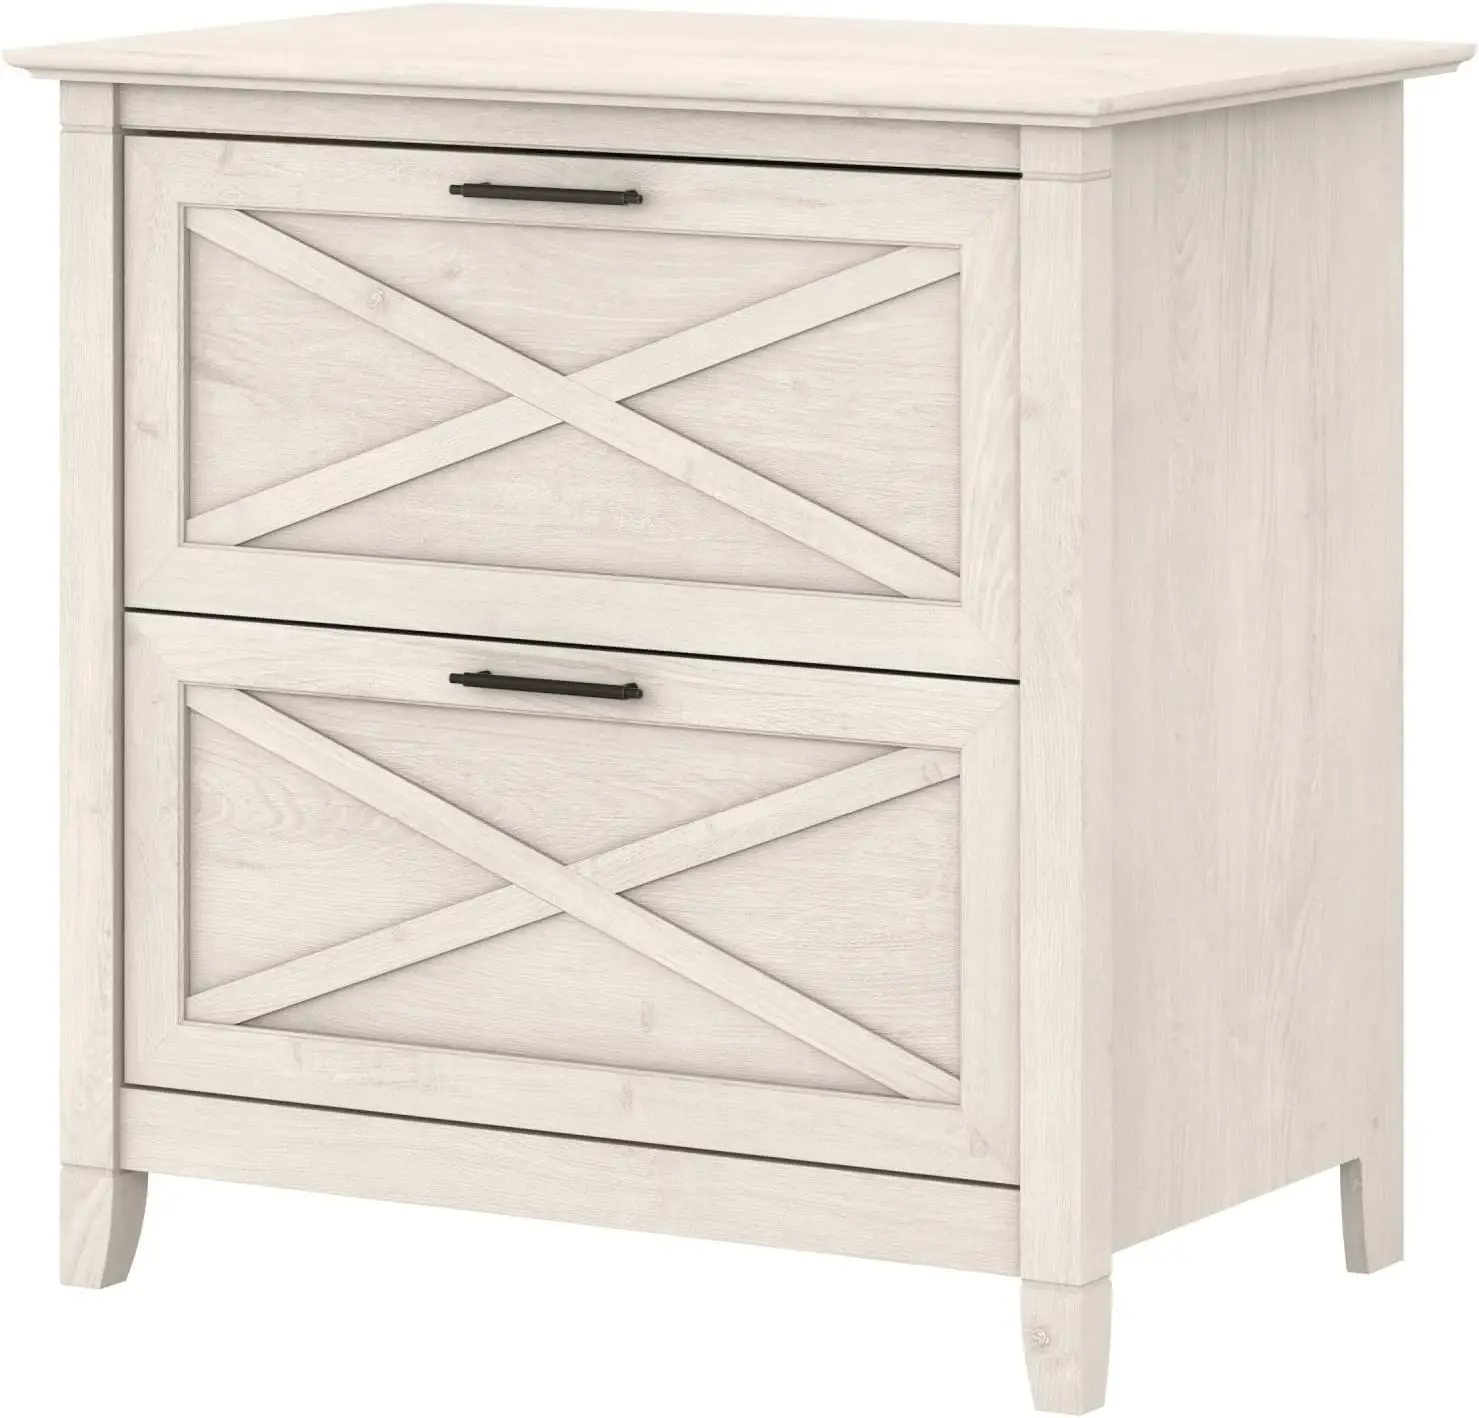 

Bush Furniture Key West 2 Lateral File Cabinet | Document Storage for Home Office | Accent Chest with Drawers, Casual